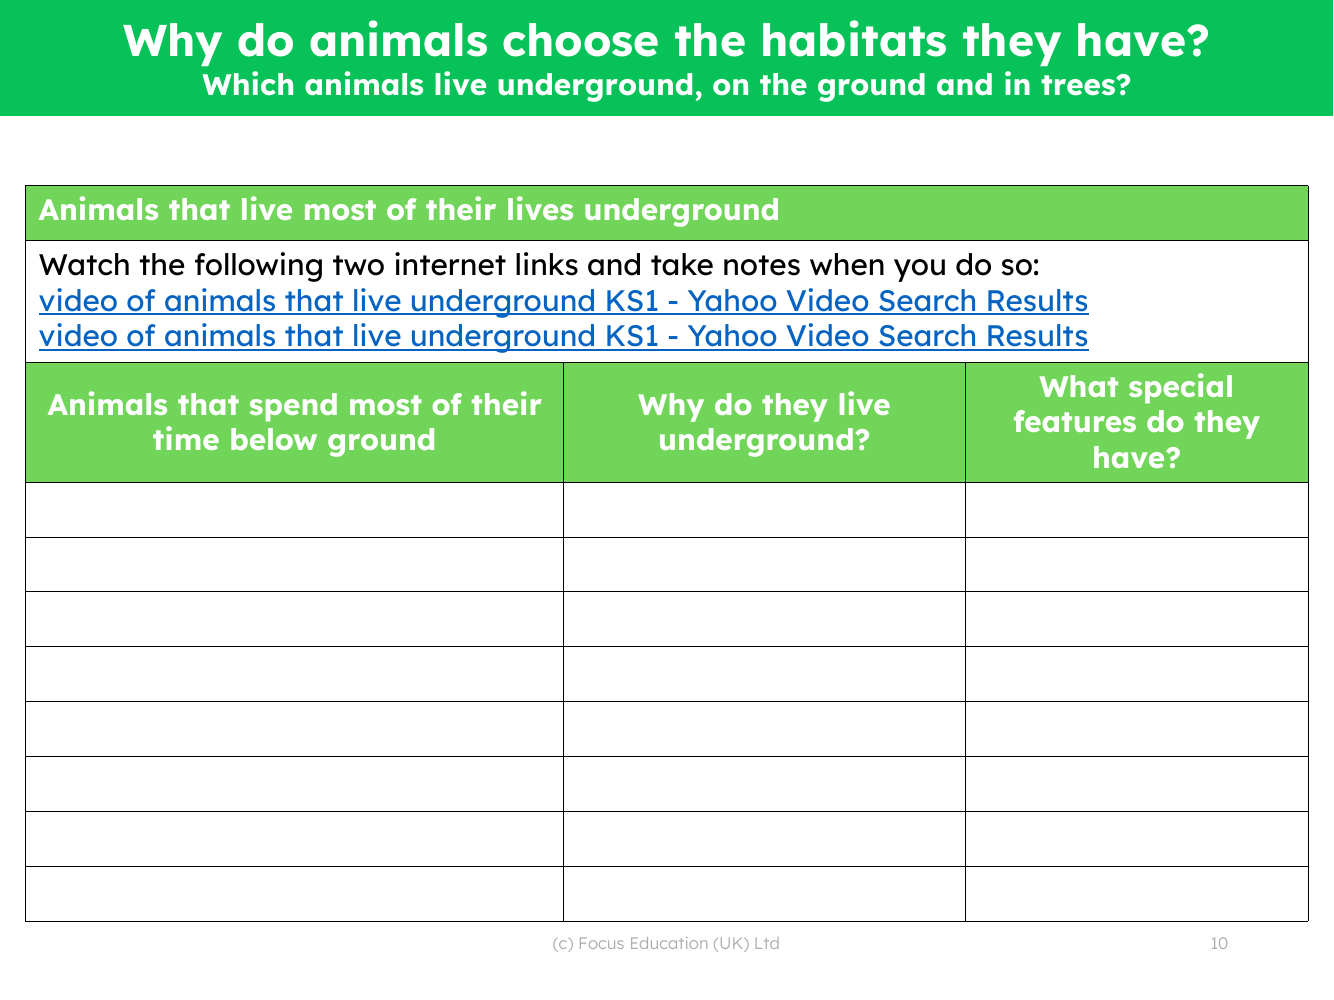 Animals that live underground - Notes table